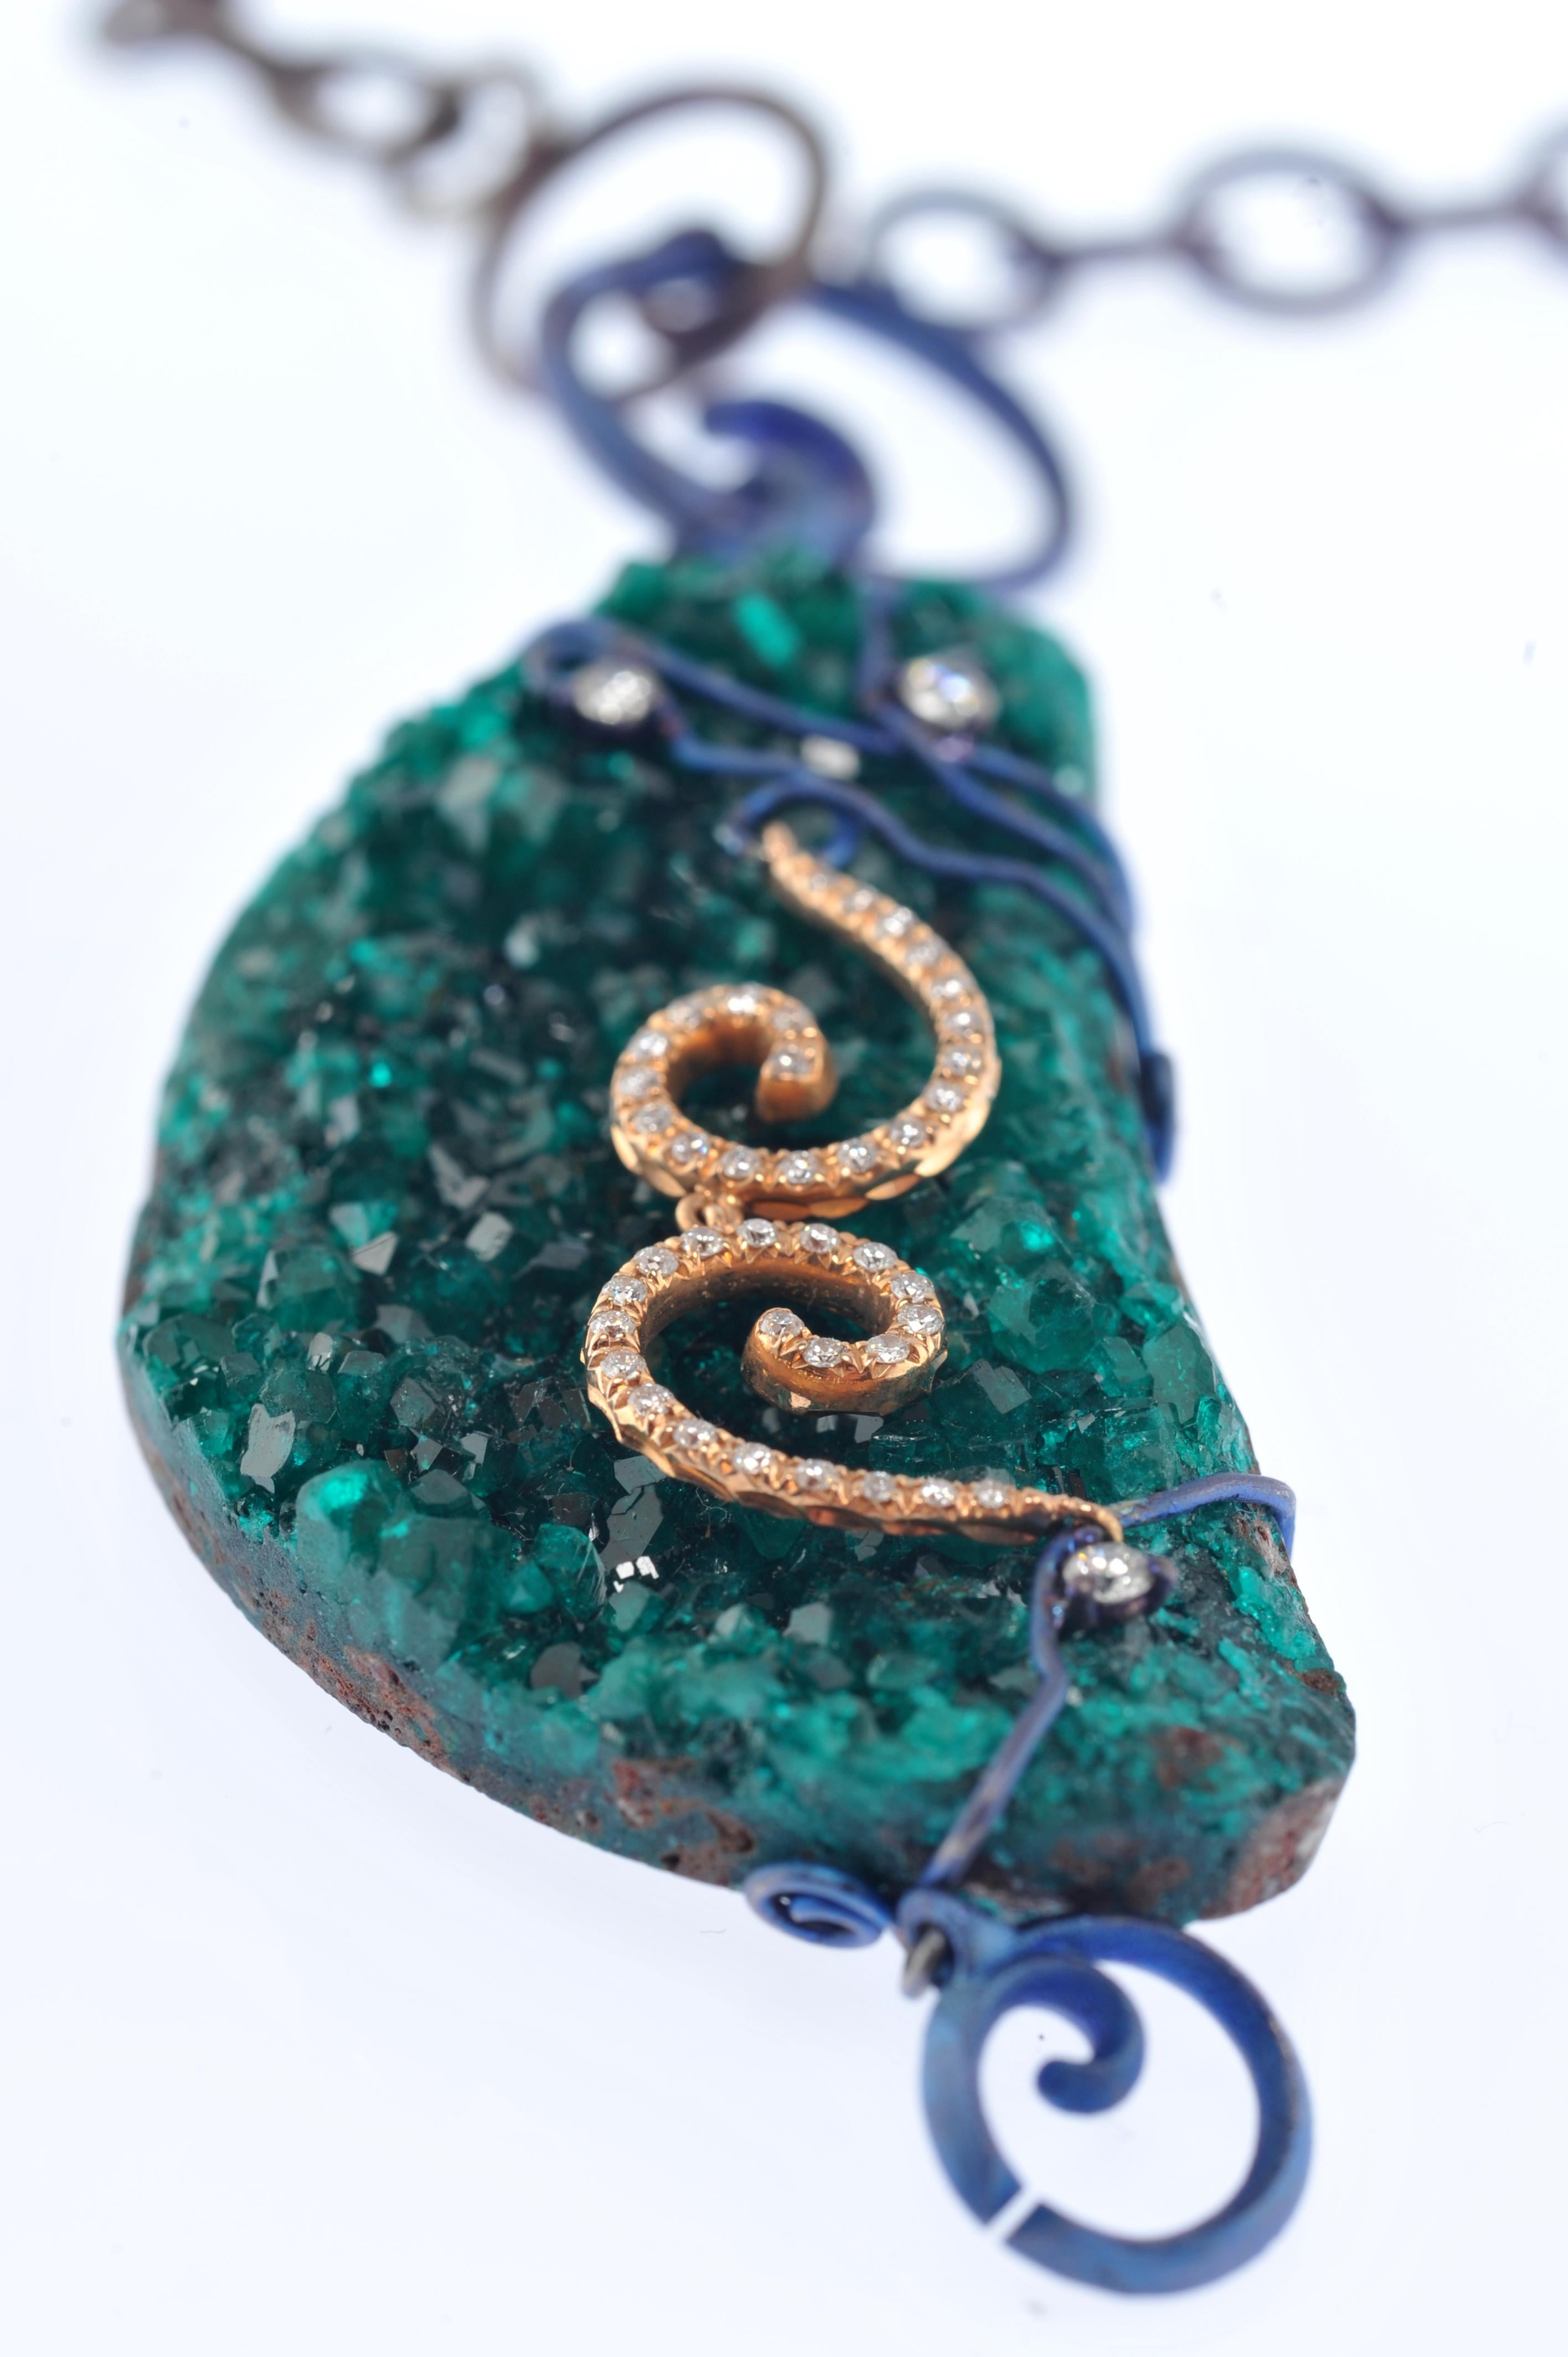 The pendant is realized with an uncut diopase, set with blue finish intertwined titanium wires. The stone is embellished with two 18Kt rose gold spiral and brilliant cut diamonds.
The pendant can be used on a rigid wire or with a chain as a